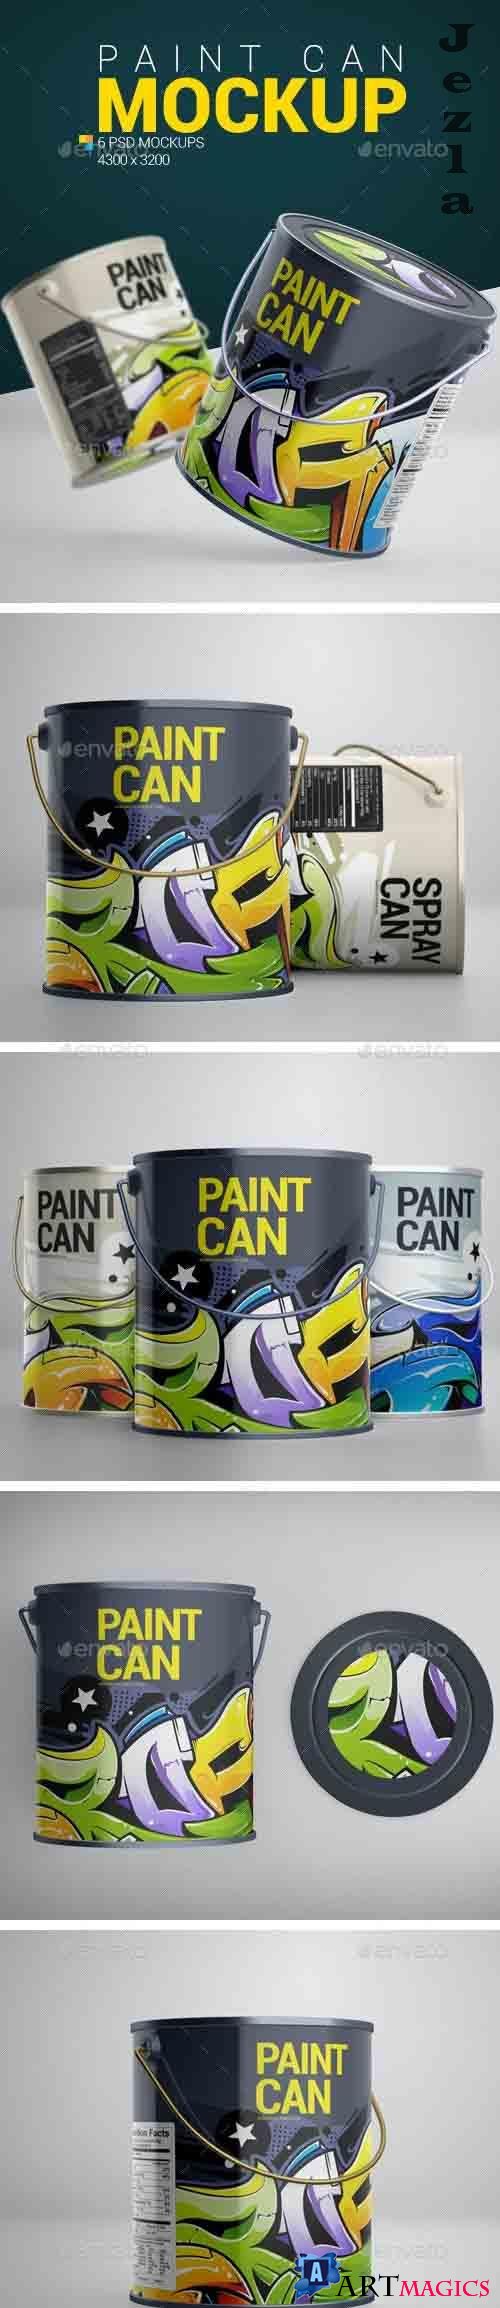 Paint Can Mockup - 24030529